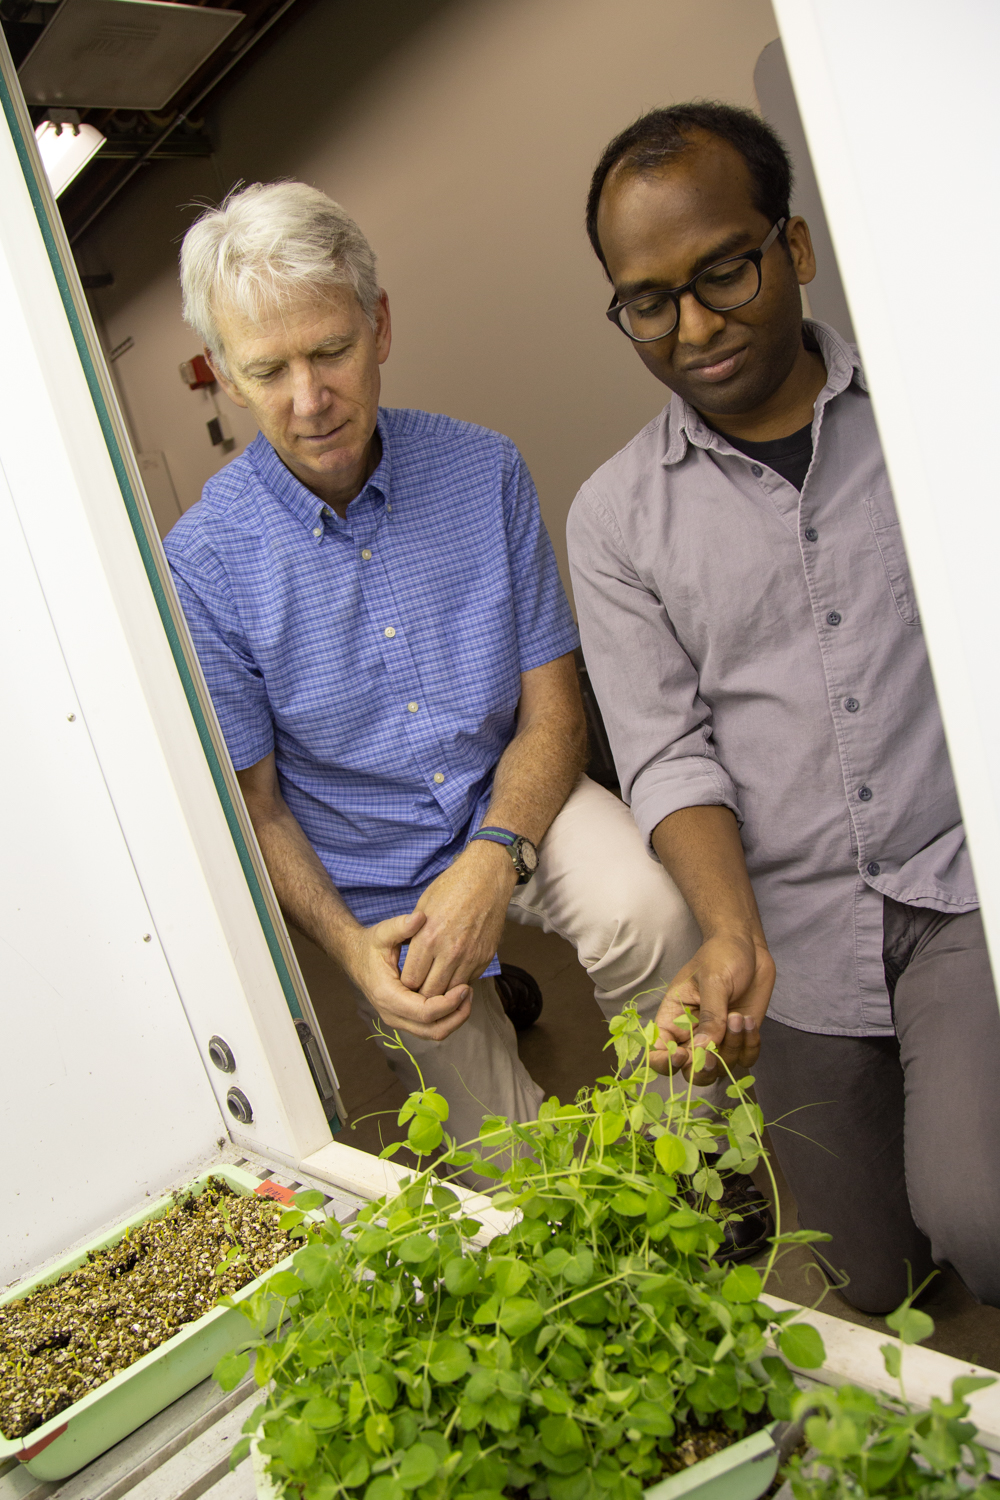 Steven Theg and Iniyan Ganesan look at their study subject, the garden pea.